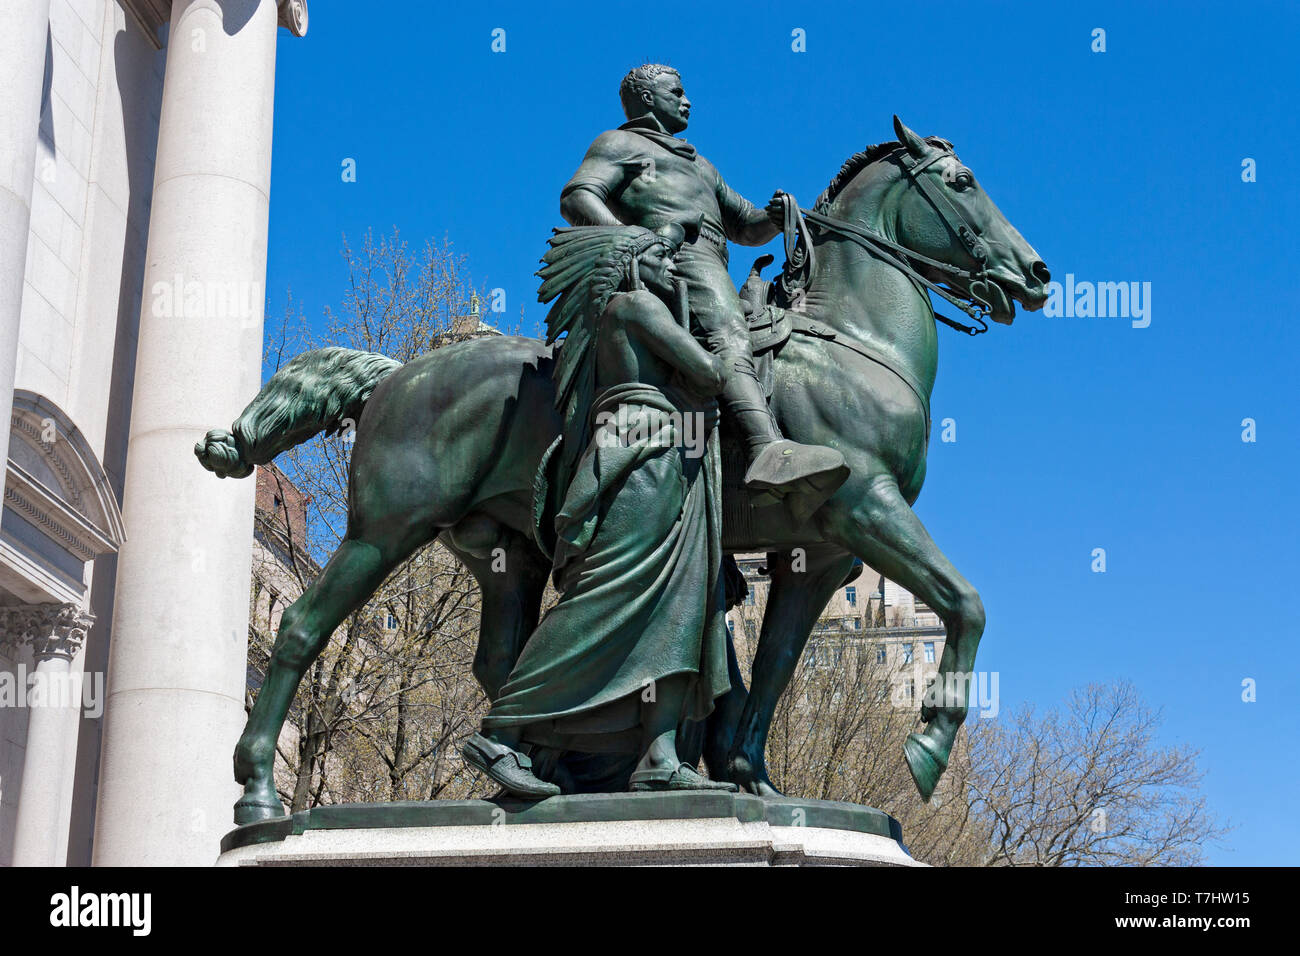 Statue of Theodore Roosevelt by James E. Fraser, outside American Museum of Natural History, Central Park West, Upper Manhattan New York City, USA Stock Photo